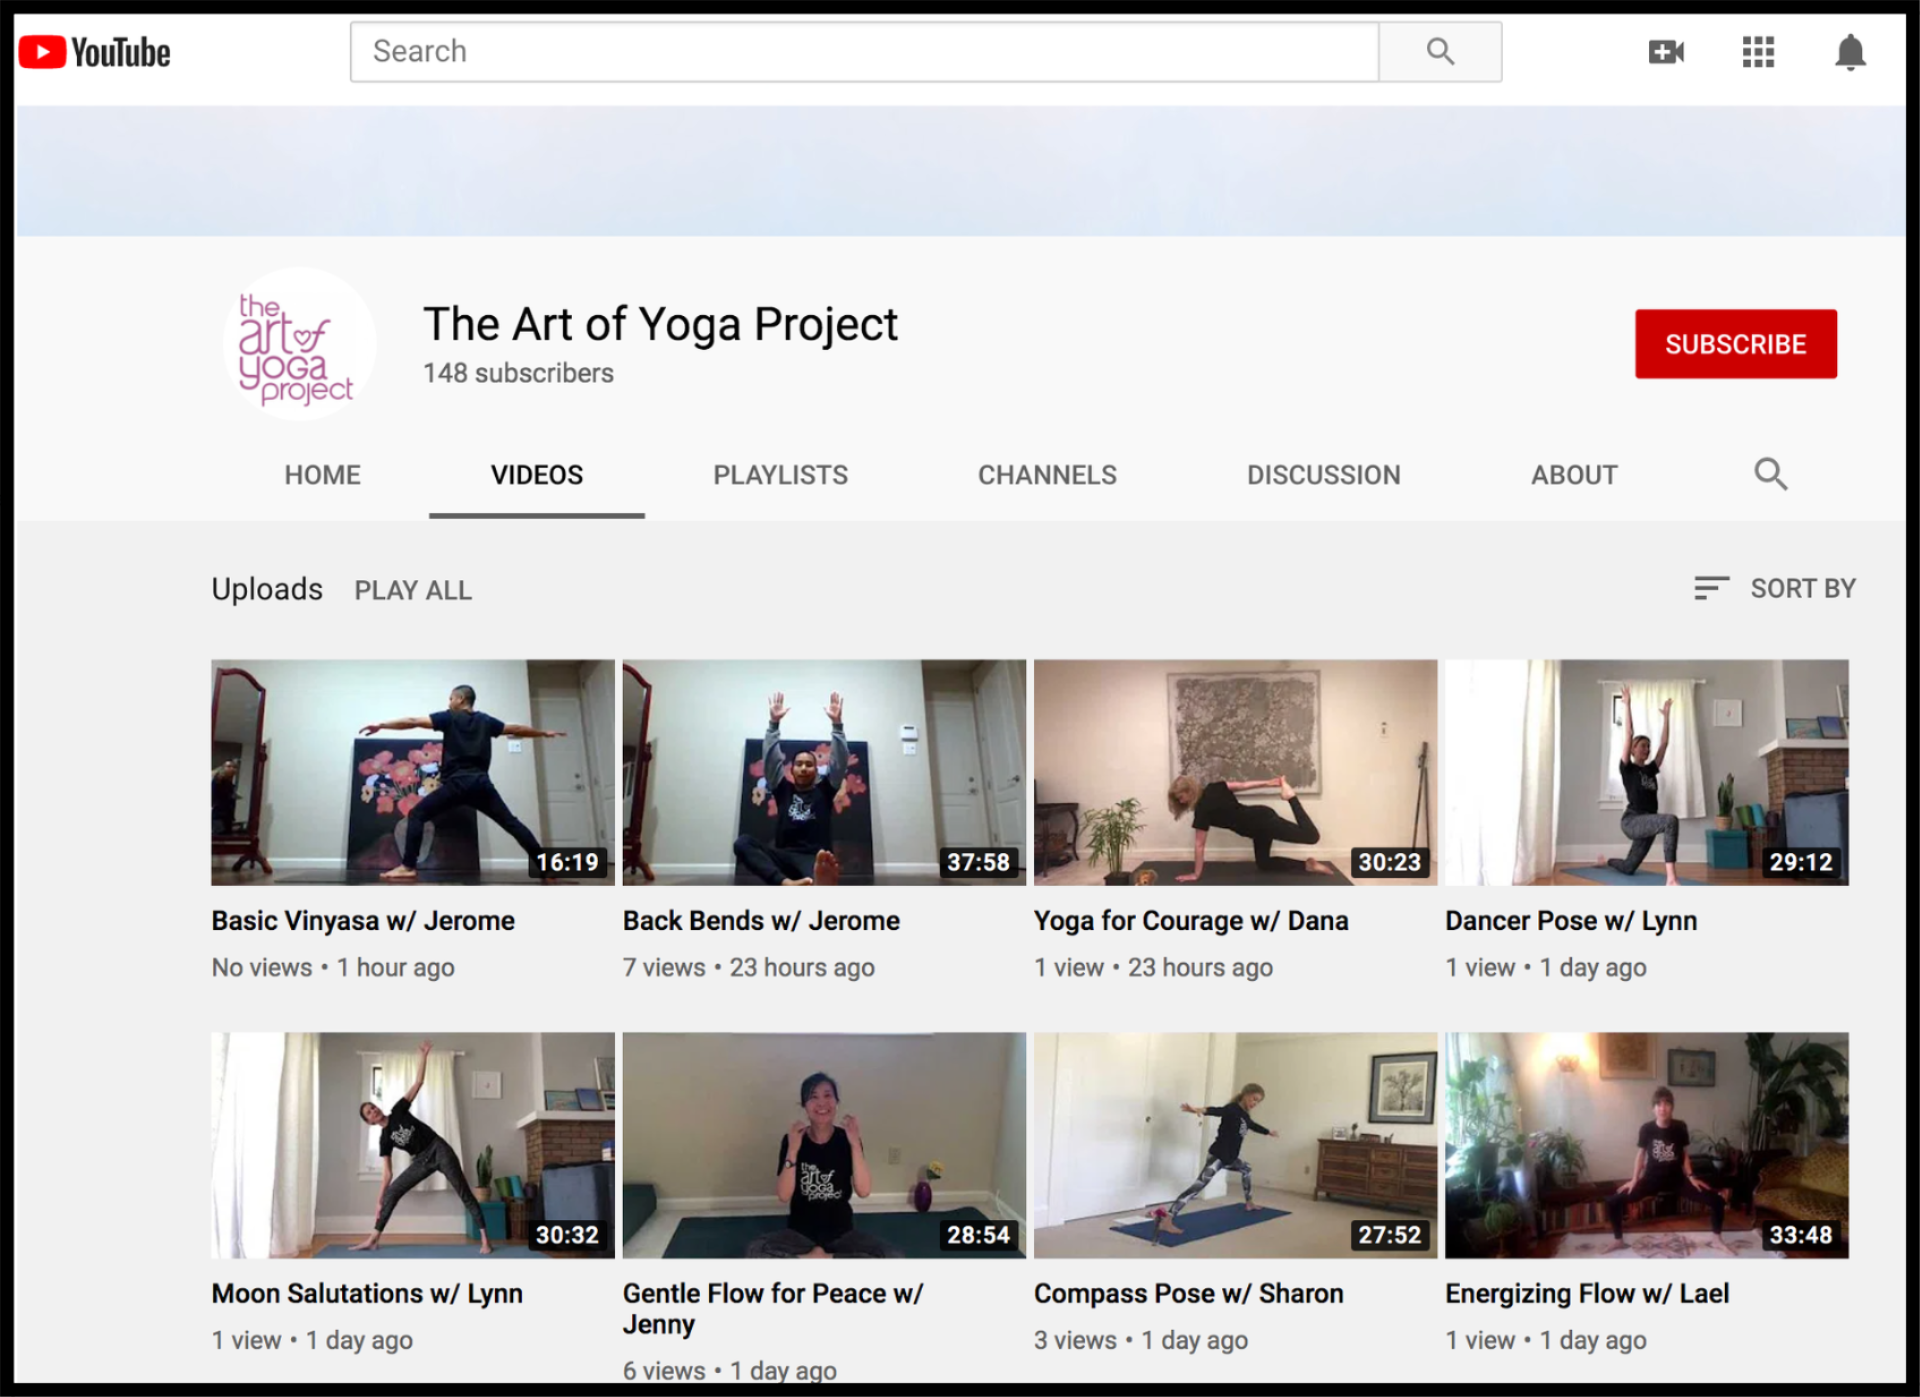 The Art of Yoga Project's trauma-informed yoga classes on YouTube